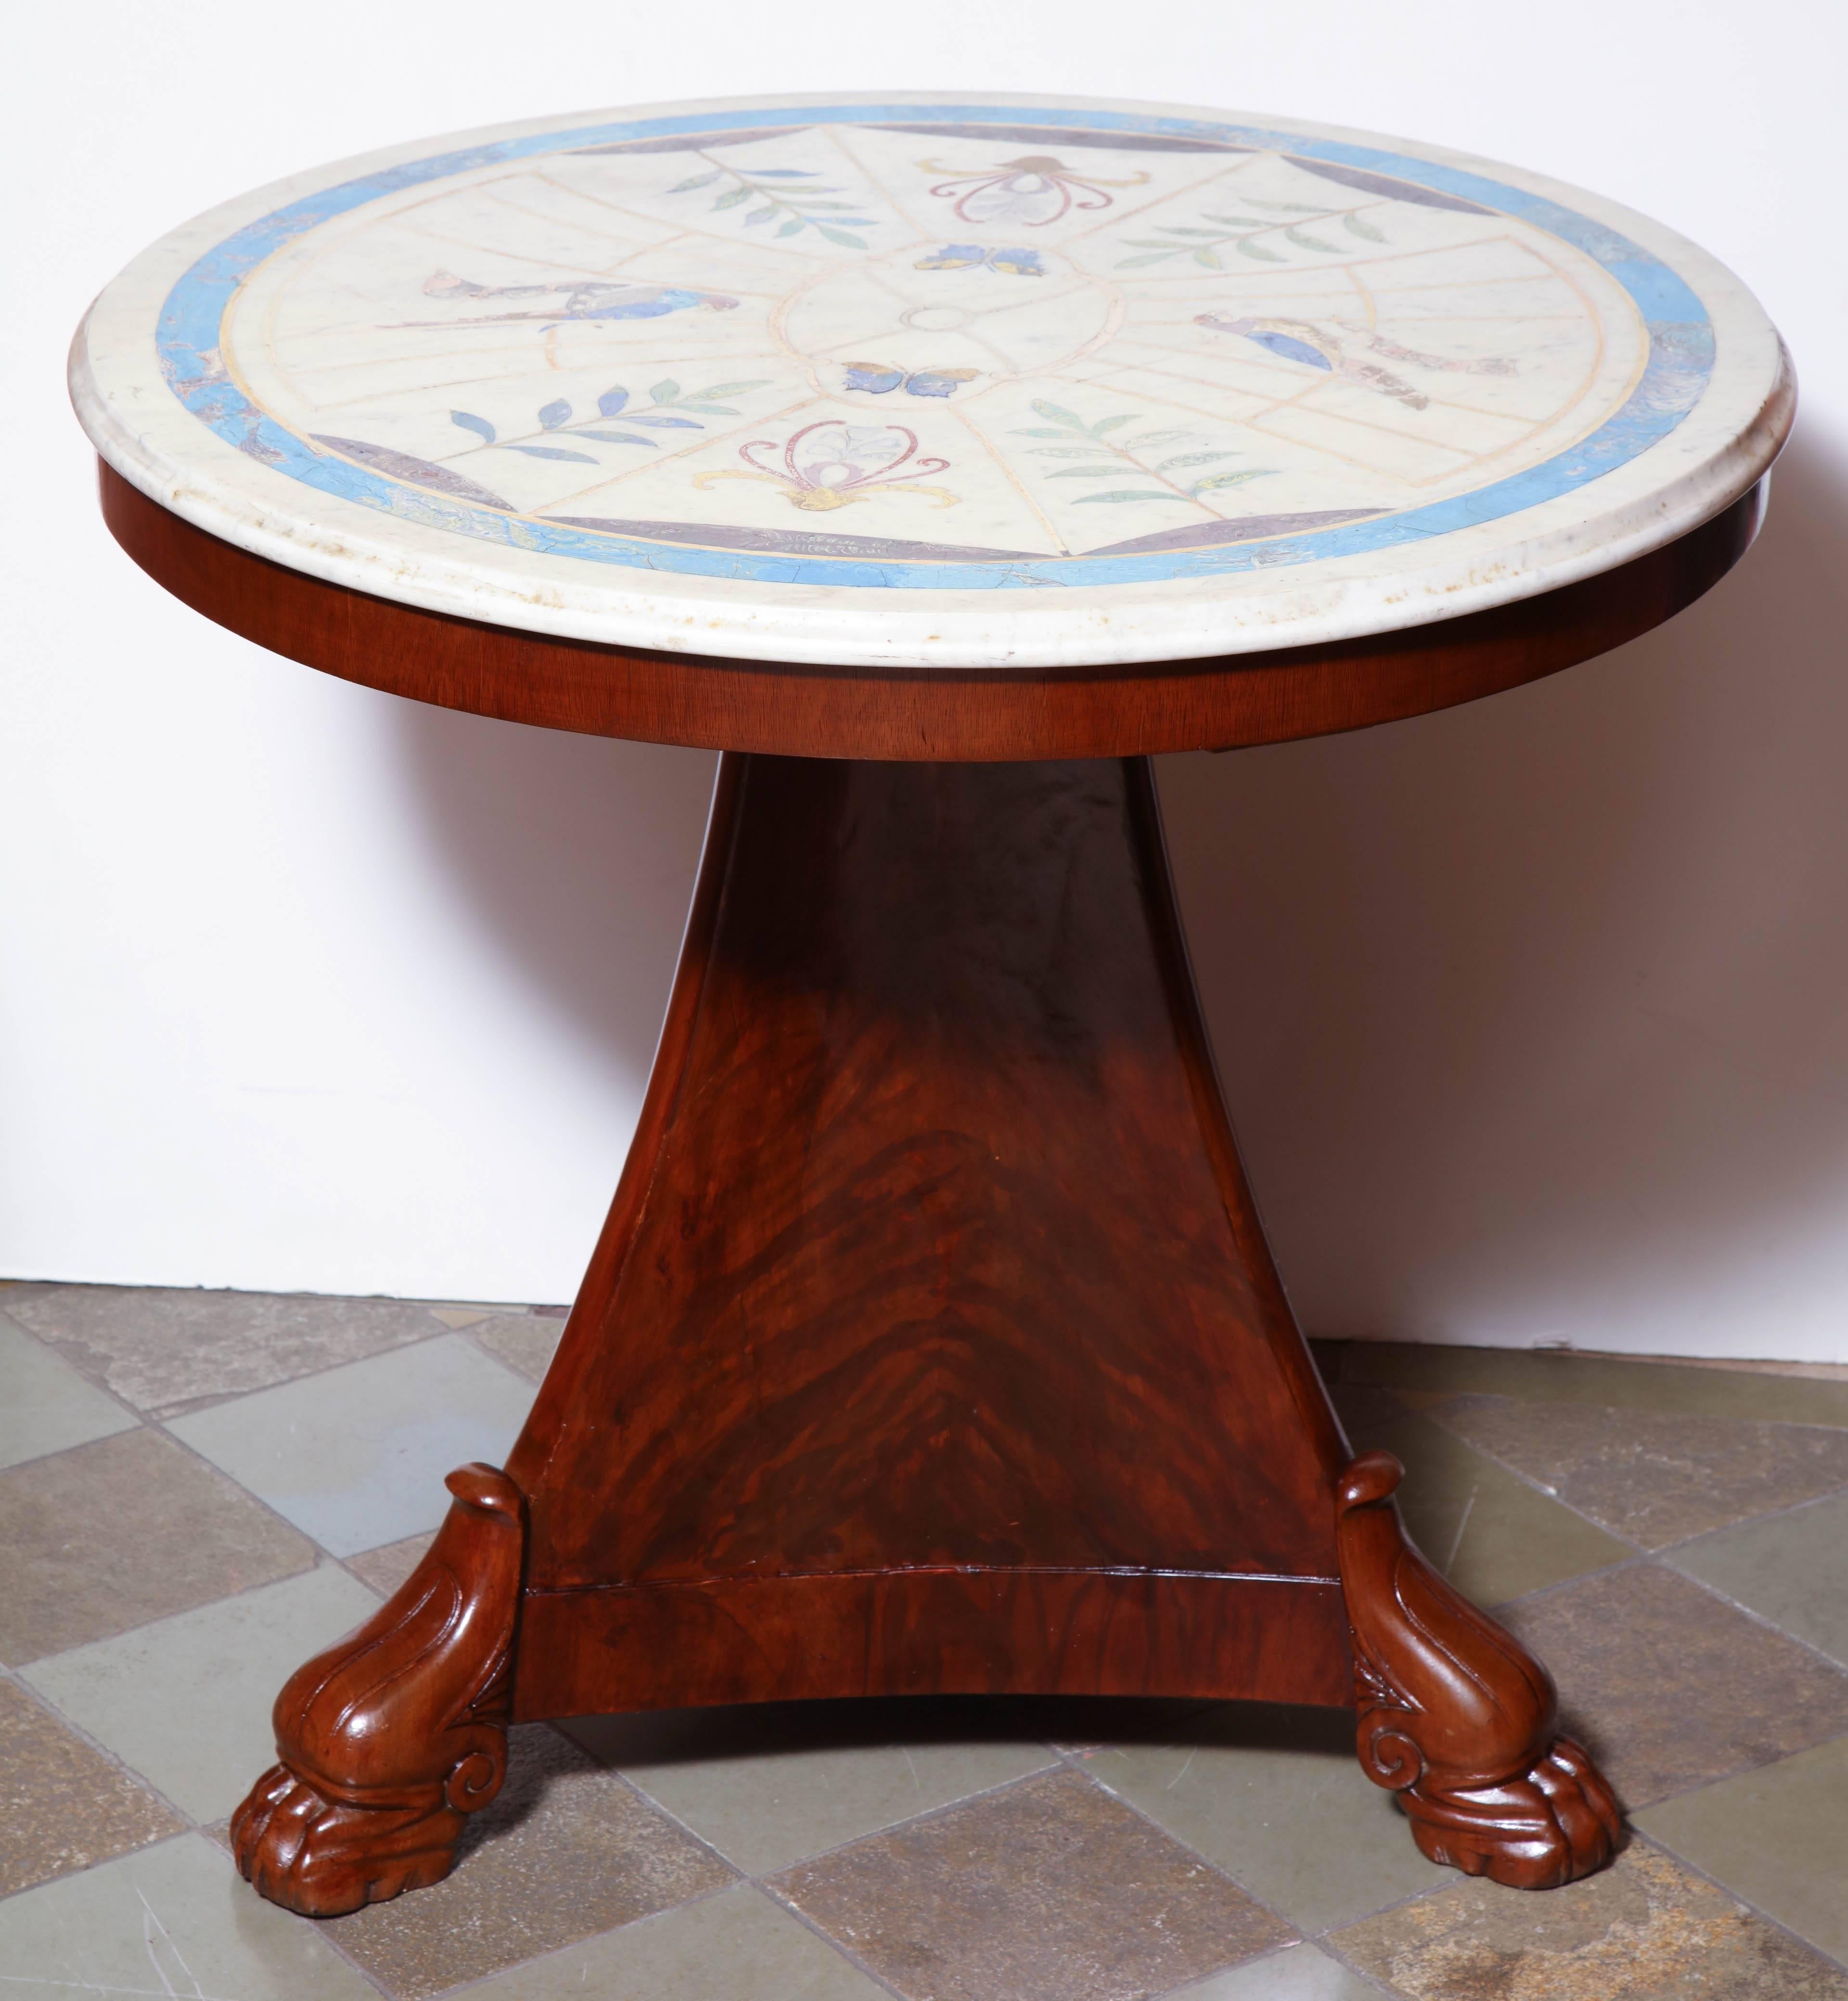 French Empire marble-top gueridon with a figured mahogany tripartite paw foot base.